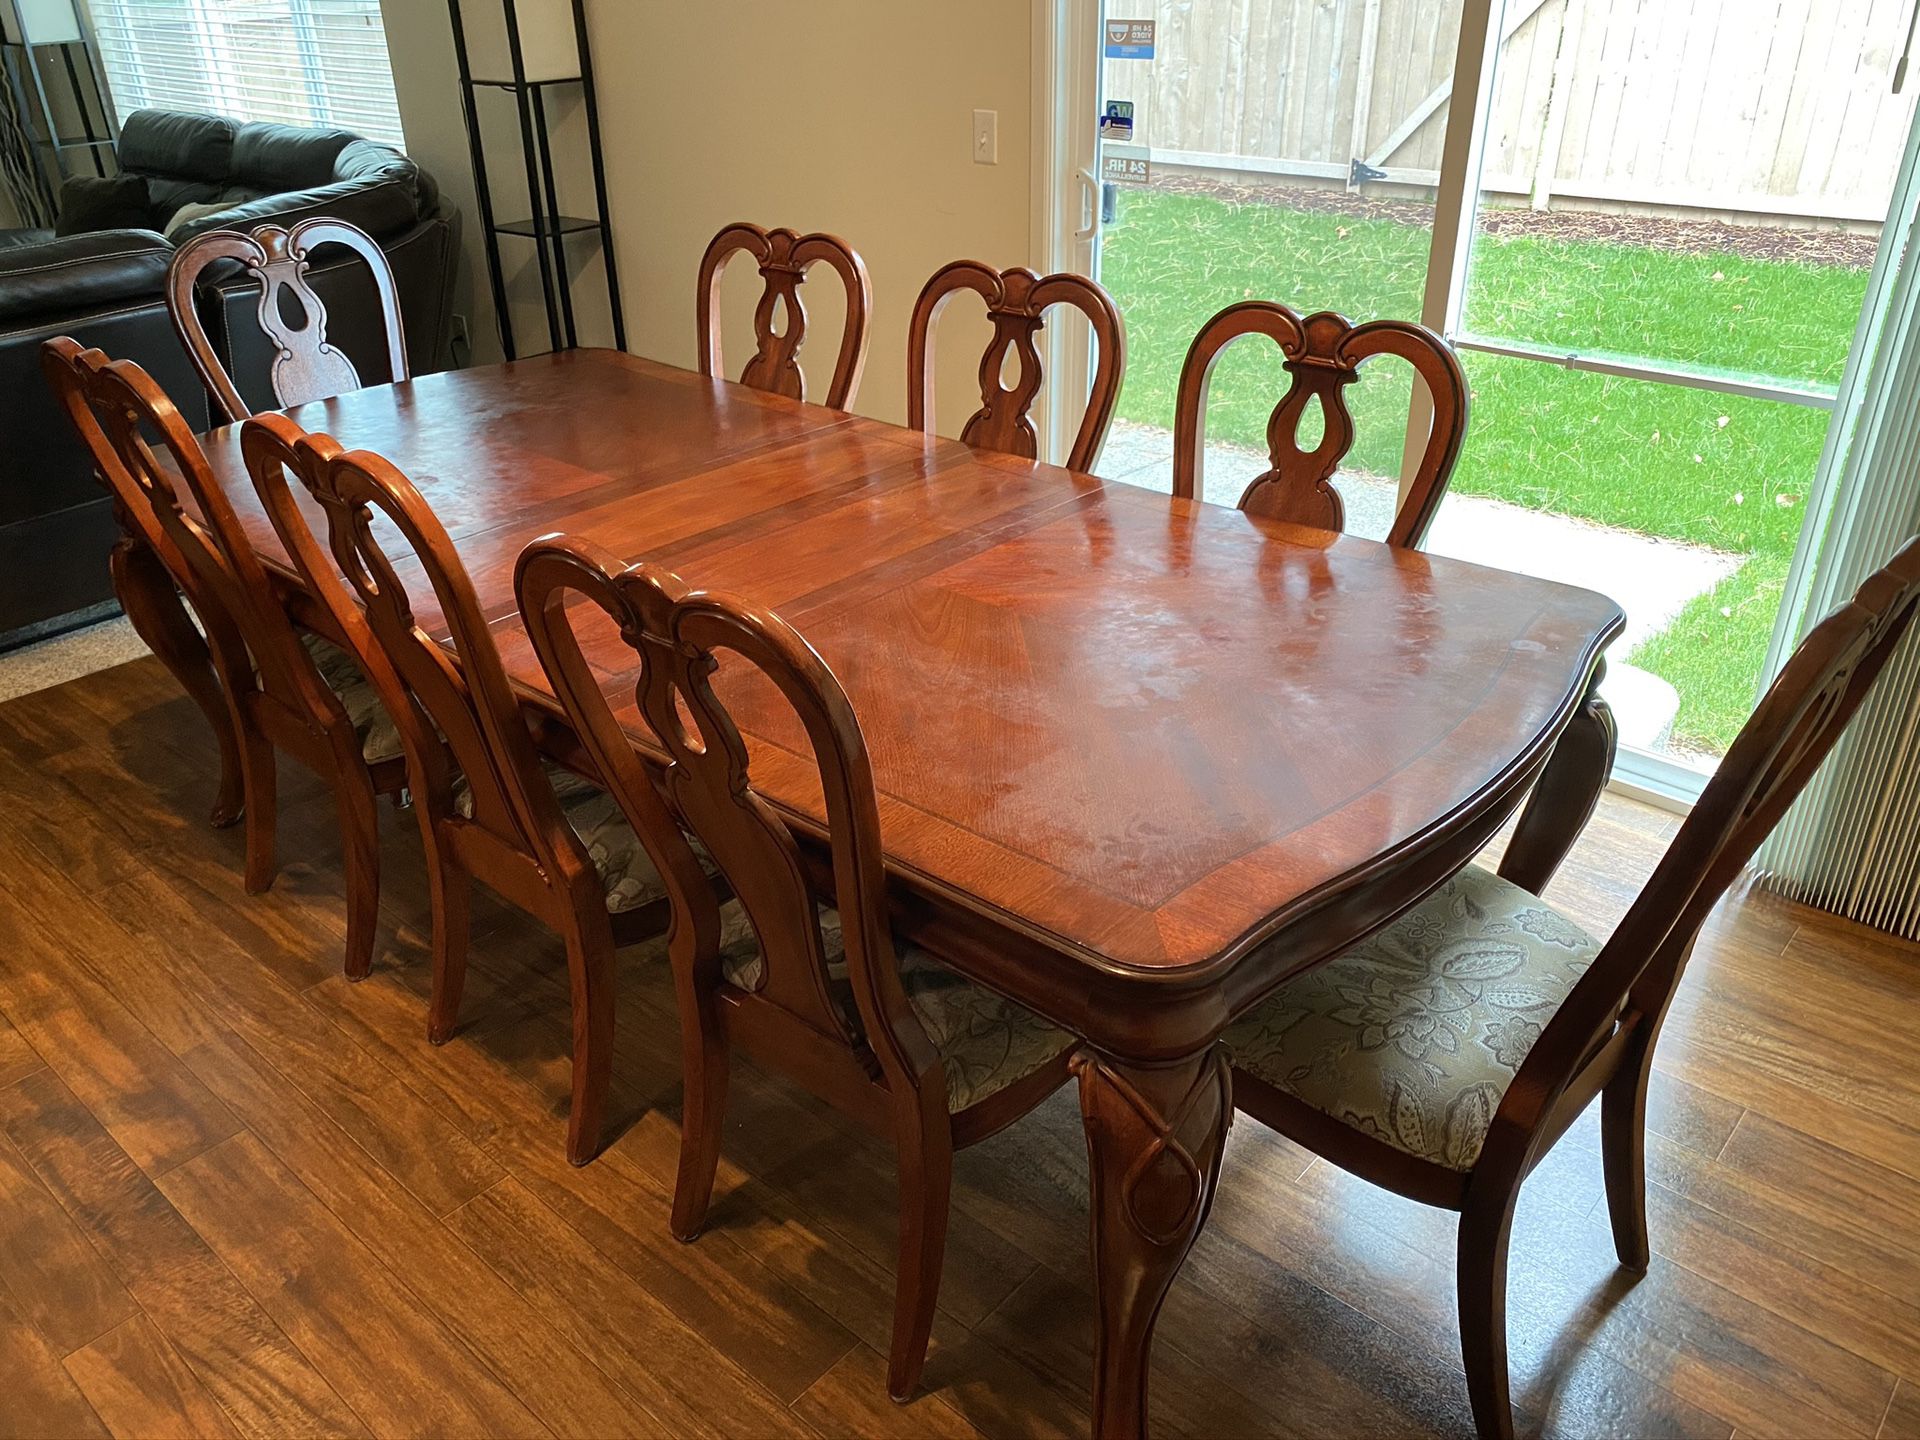 Dining Table with 8 stools, size 44x94, folds to 44x82 and to 44x70